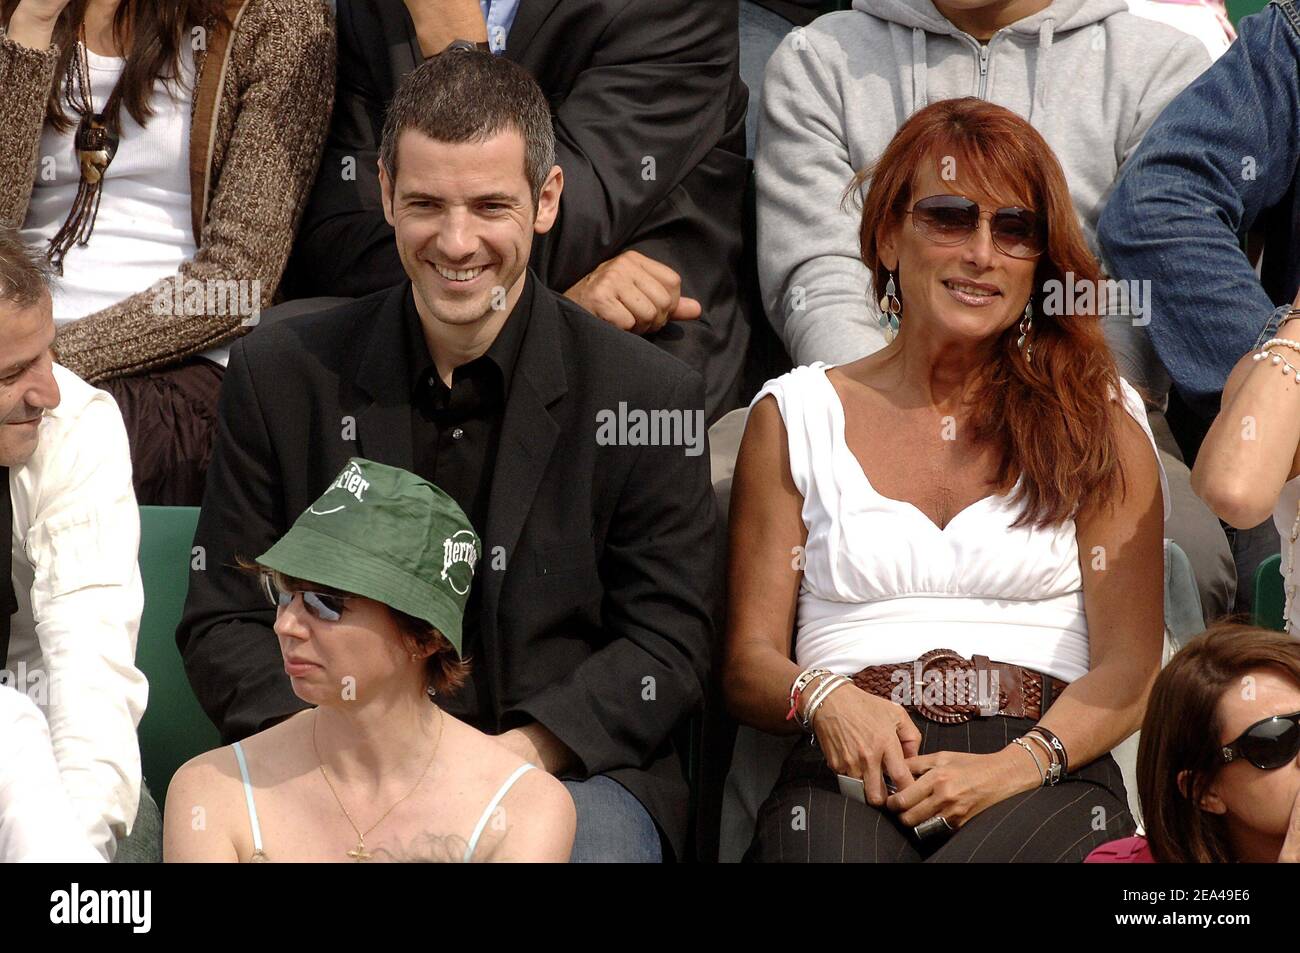 French singer Julie Pietri and french actor Bruno Putzulu attend the match between Spain's Rafael Nadal and Swiss Roger Federer in the semi final of the French Open at the Roland Garros stadium in Paris, France on June 03, 2005. Photo by Gorassini-Zabulon/ABACA. Stock Photo